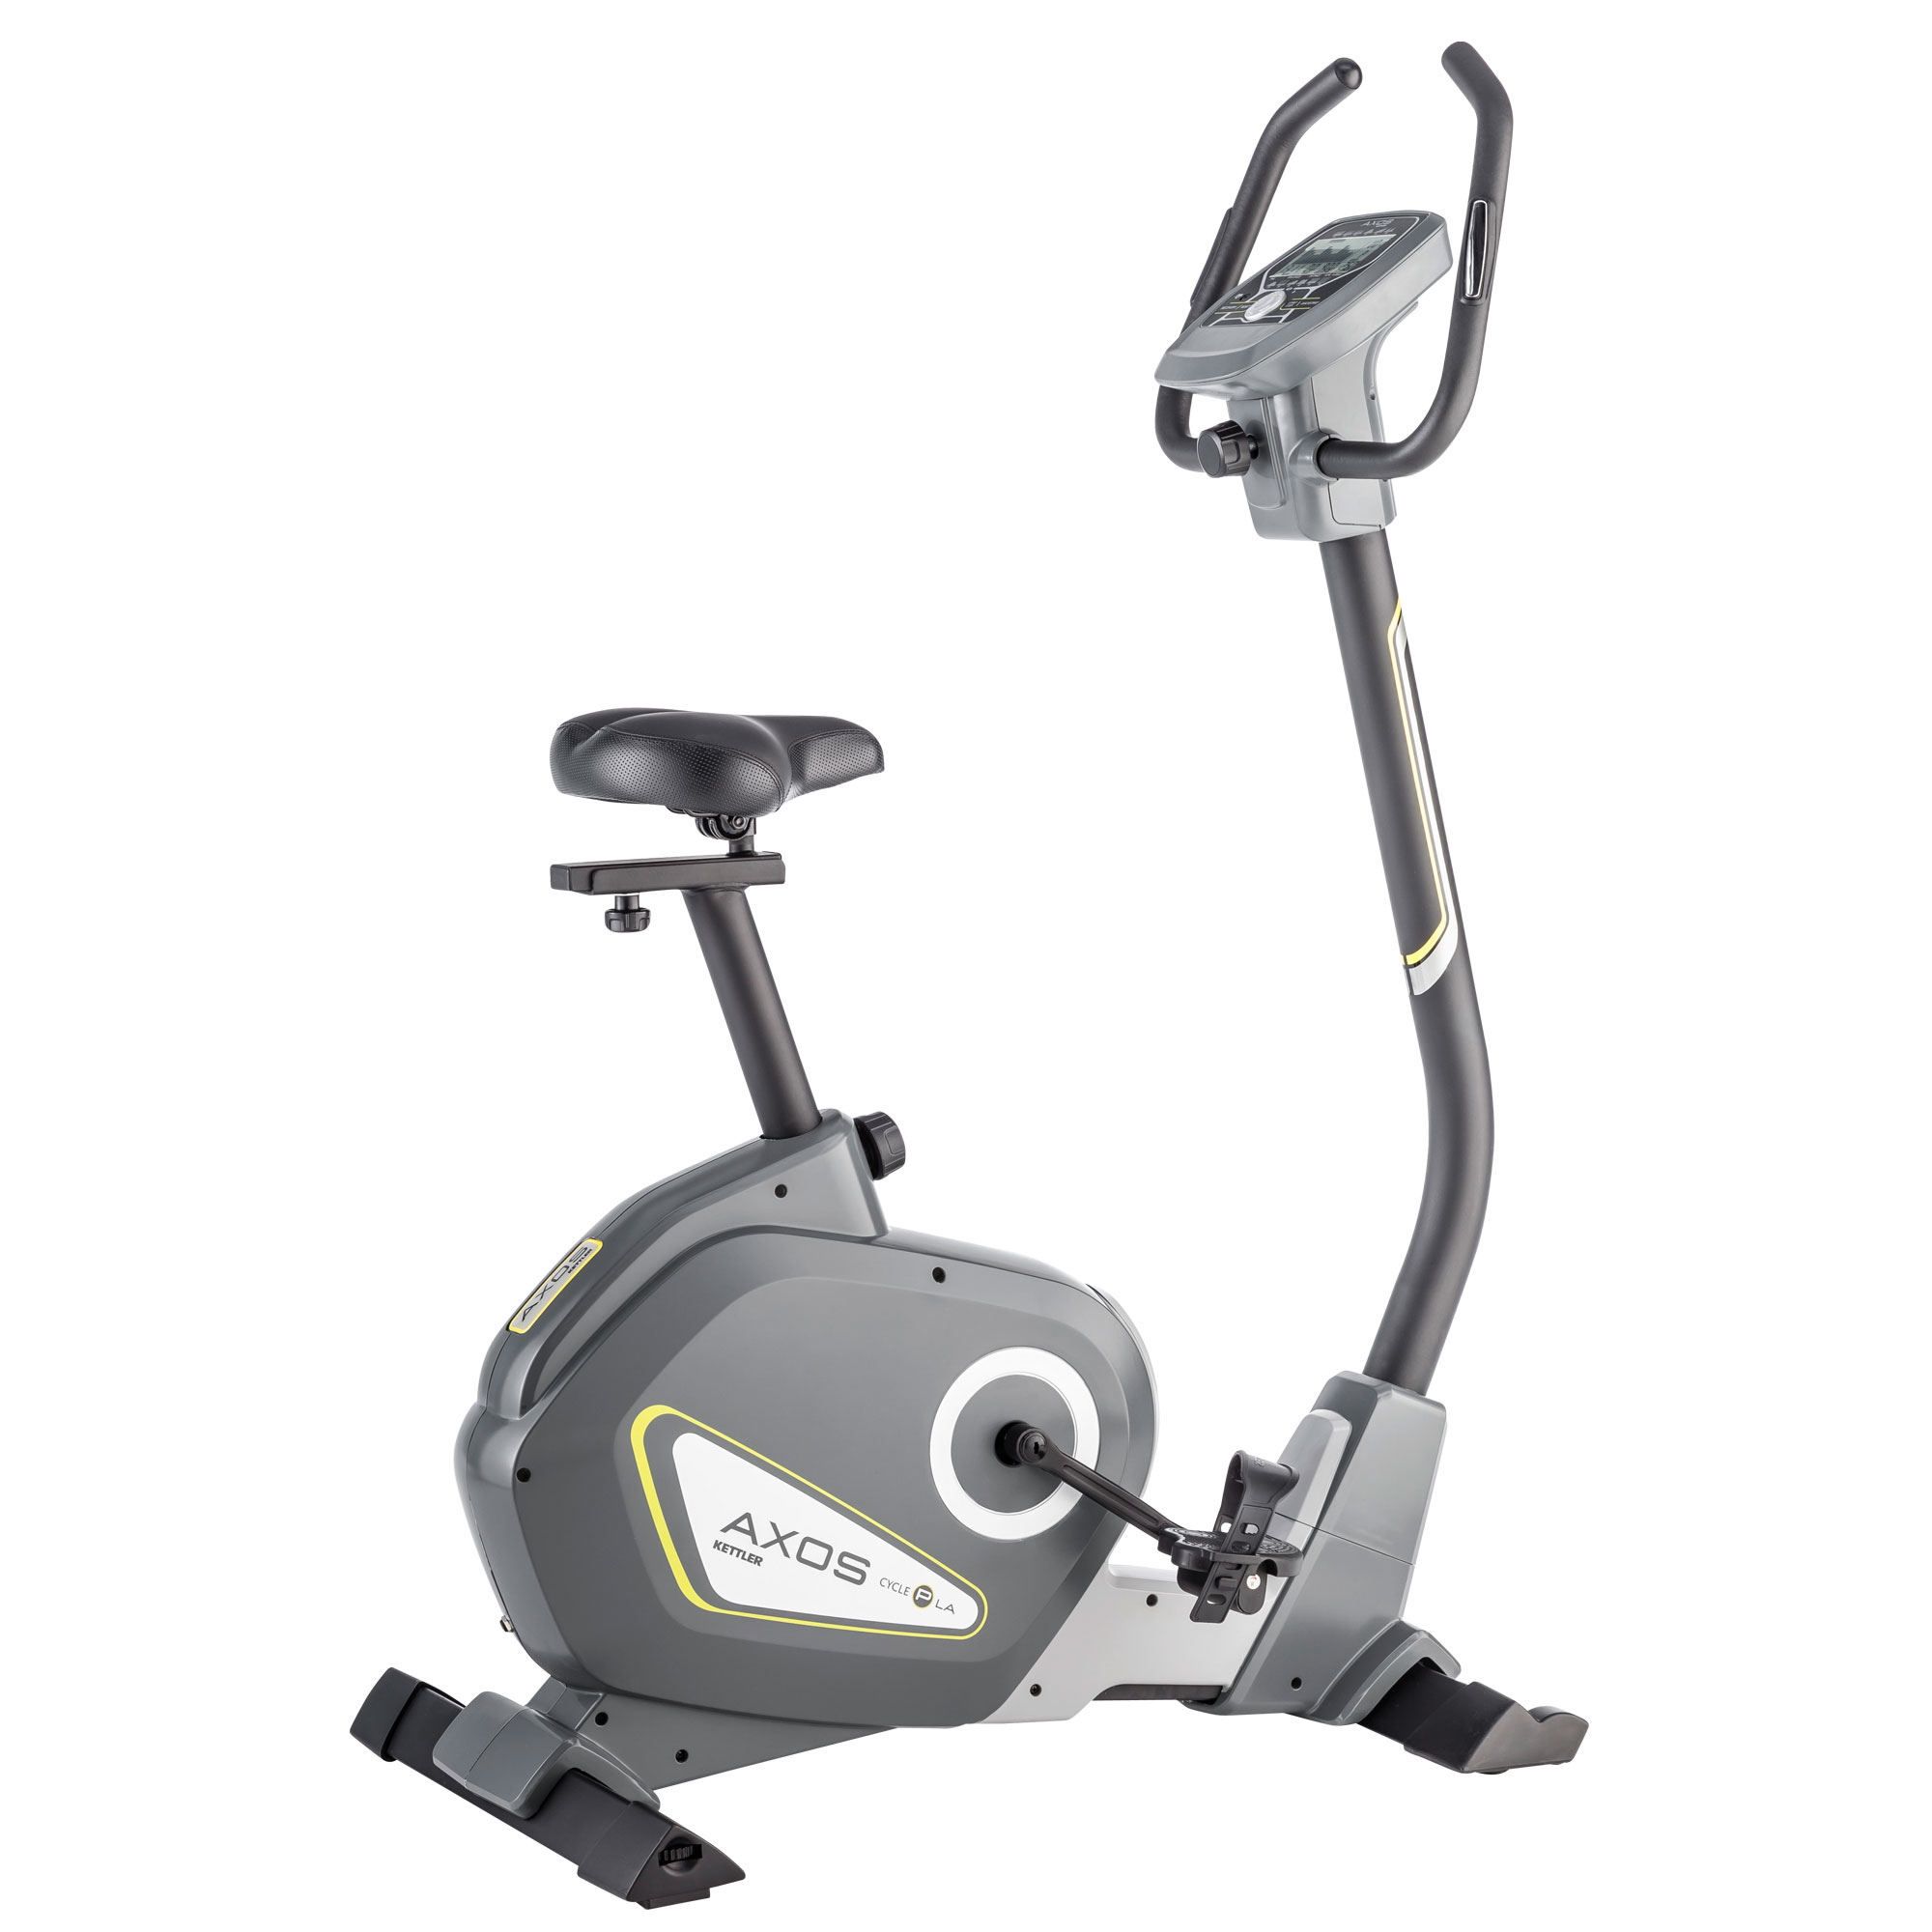 enthousiasme Besnoeiing zin Exercise bike - with easy access from Senior24.dk - AssistData